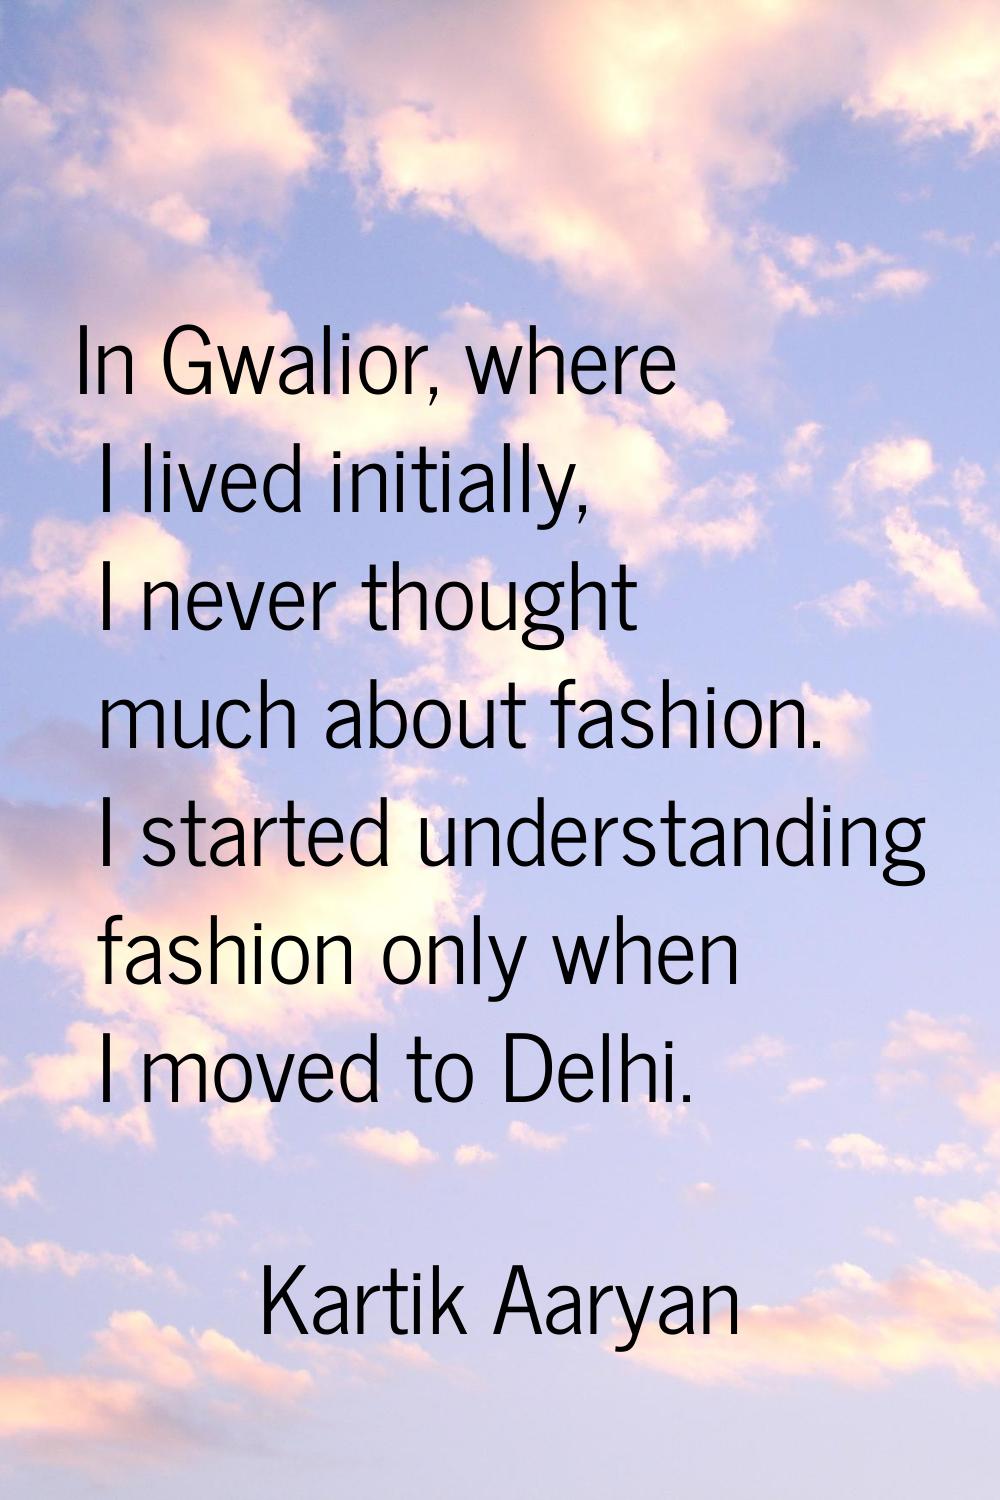 In Gwalior, where I lived initially, I never thought much about fashion. I started understanding fa